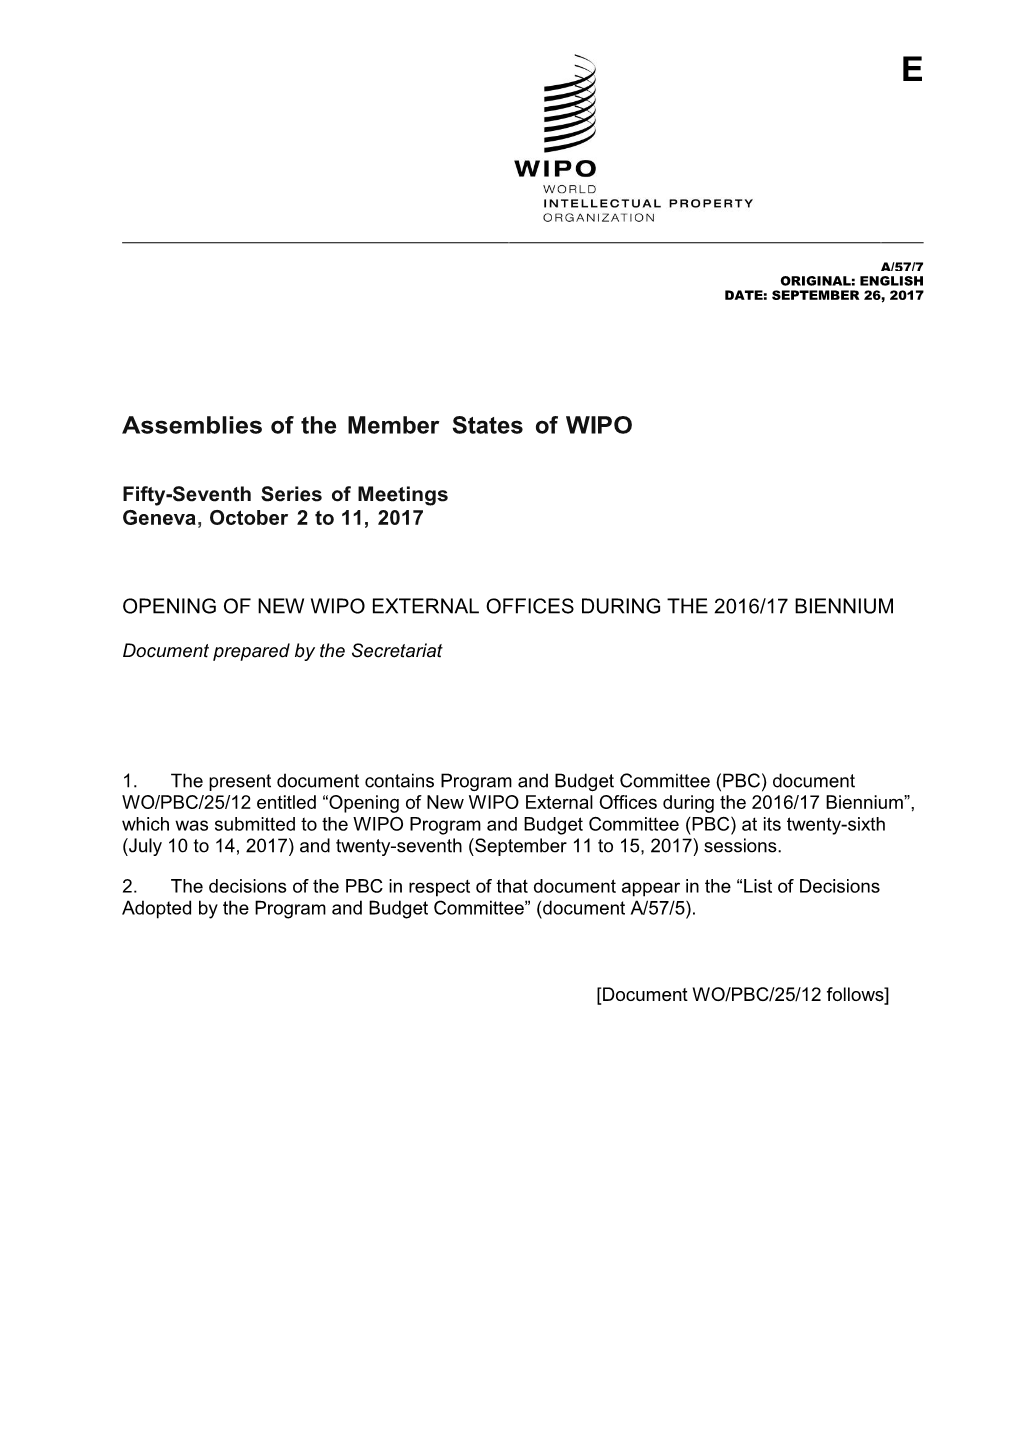 Assemblies of the Member States of WIPO